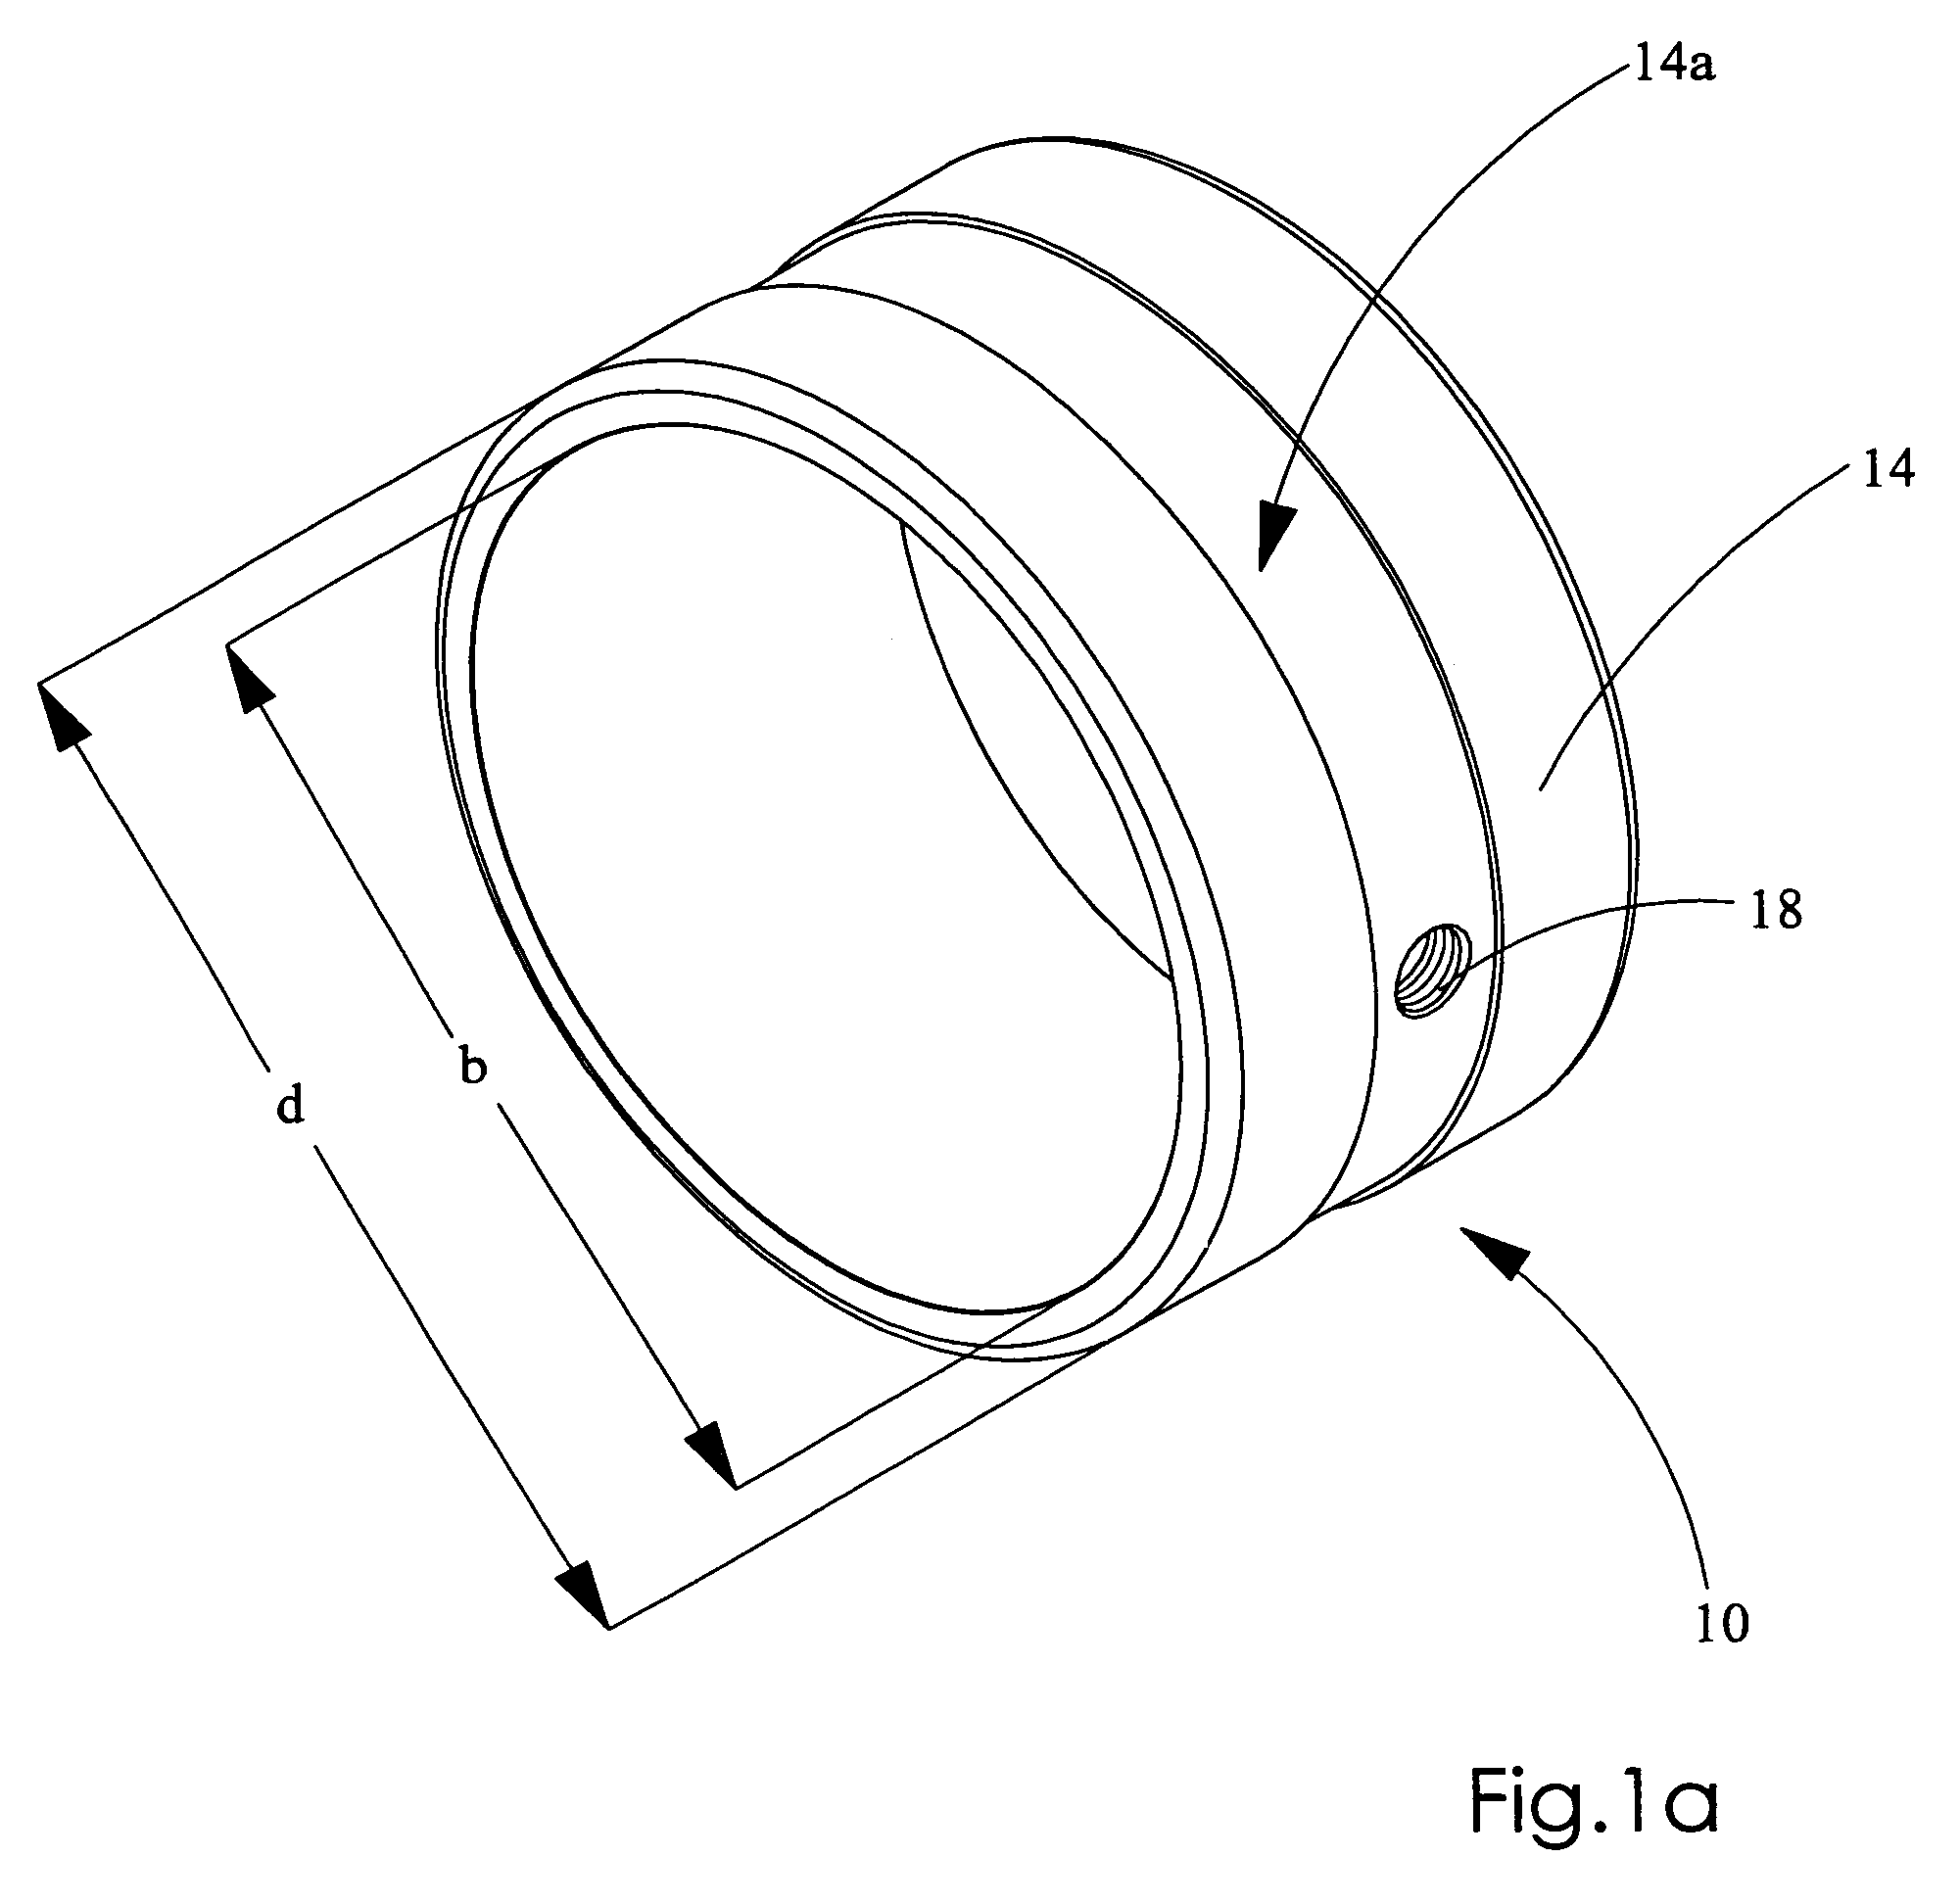 Practice putting and ball retrieving device